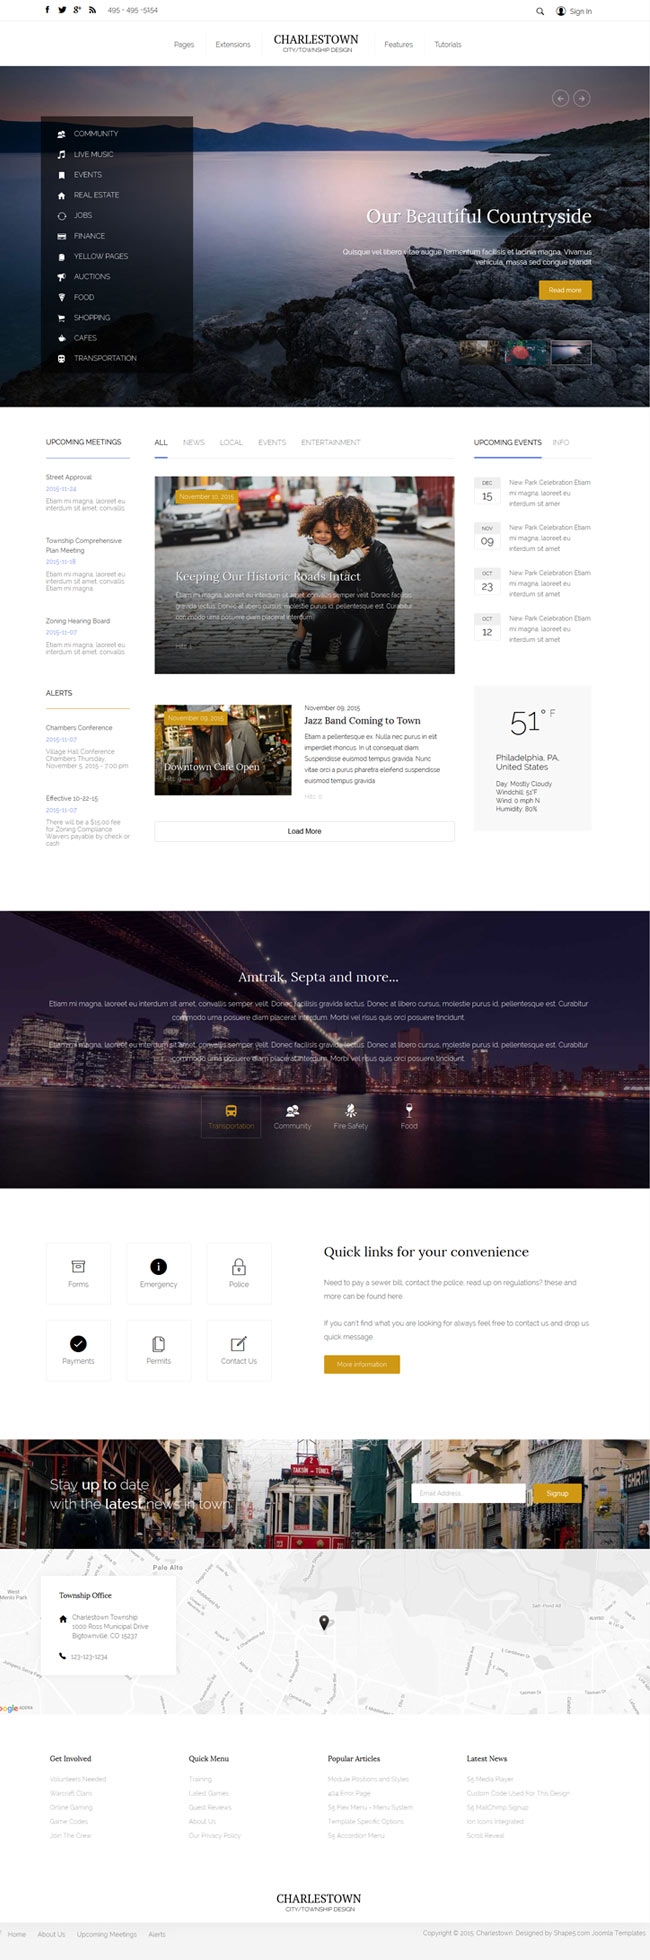 Charlestown - Township or City Council Joomla 4 Template